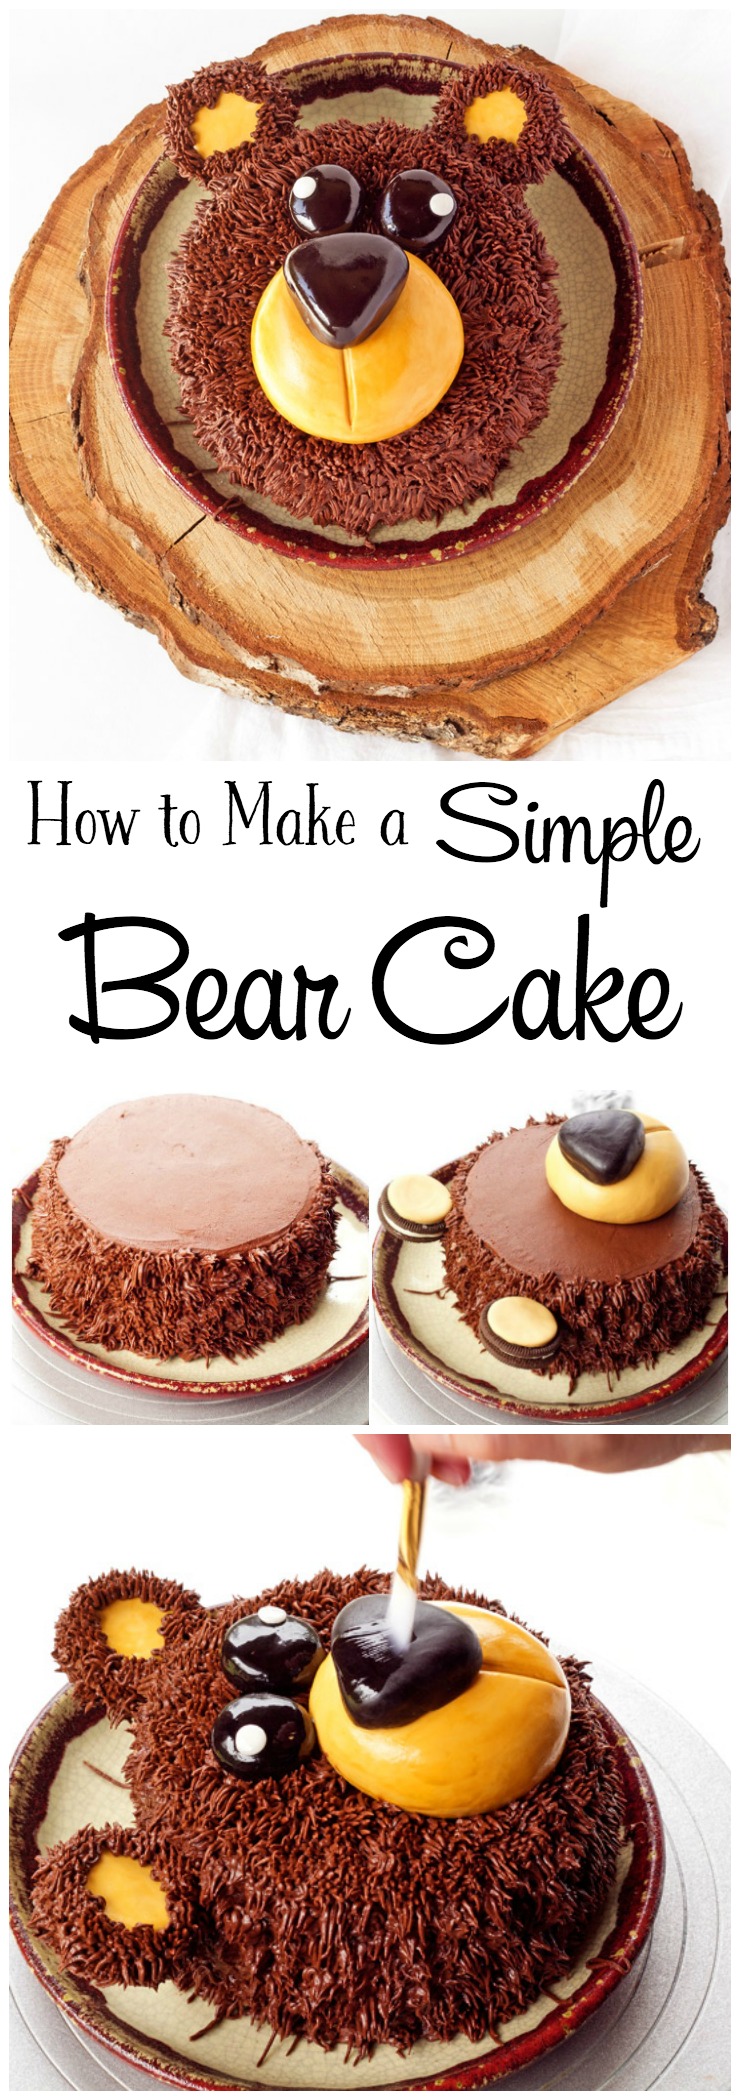 How to Make a Cute Little Bear Cake with a How to Video | The Bearfoot Baker